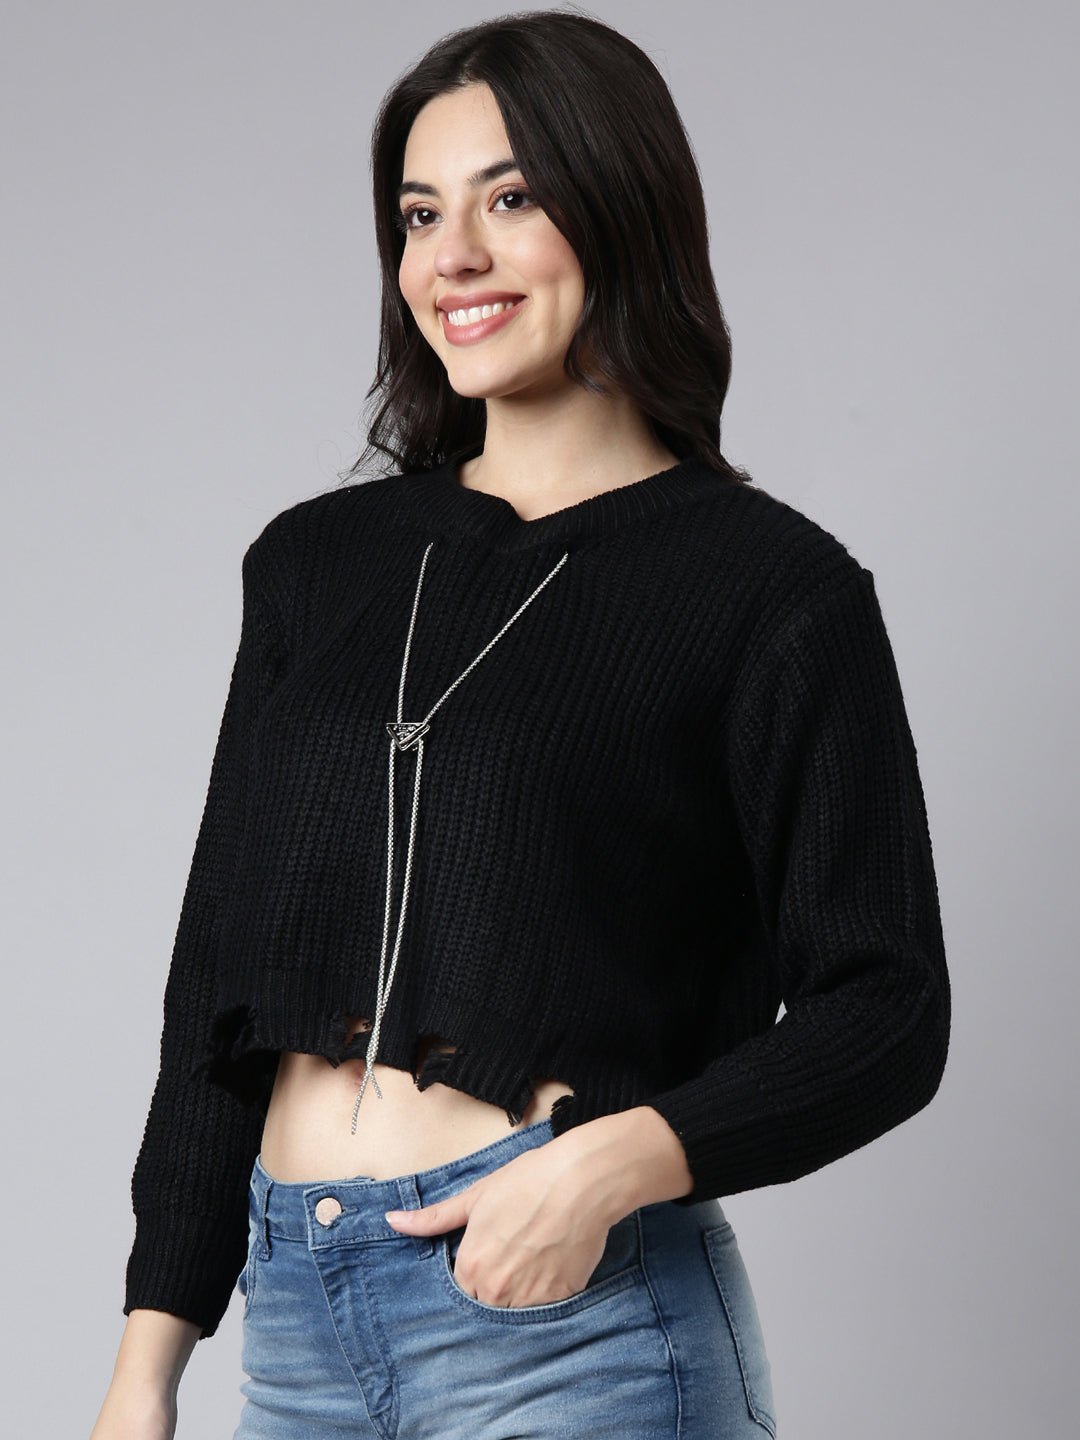 Women Solid Black Boxy Top Comes With Chain